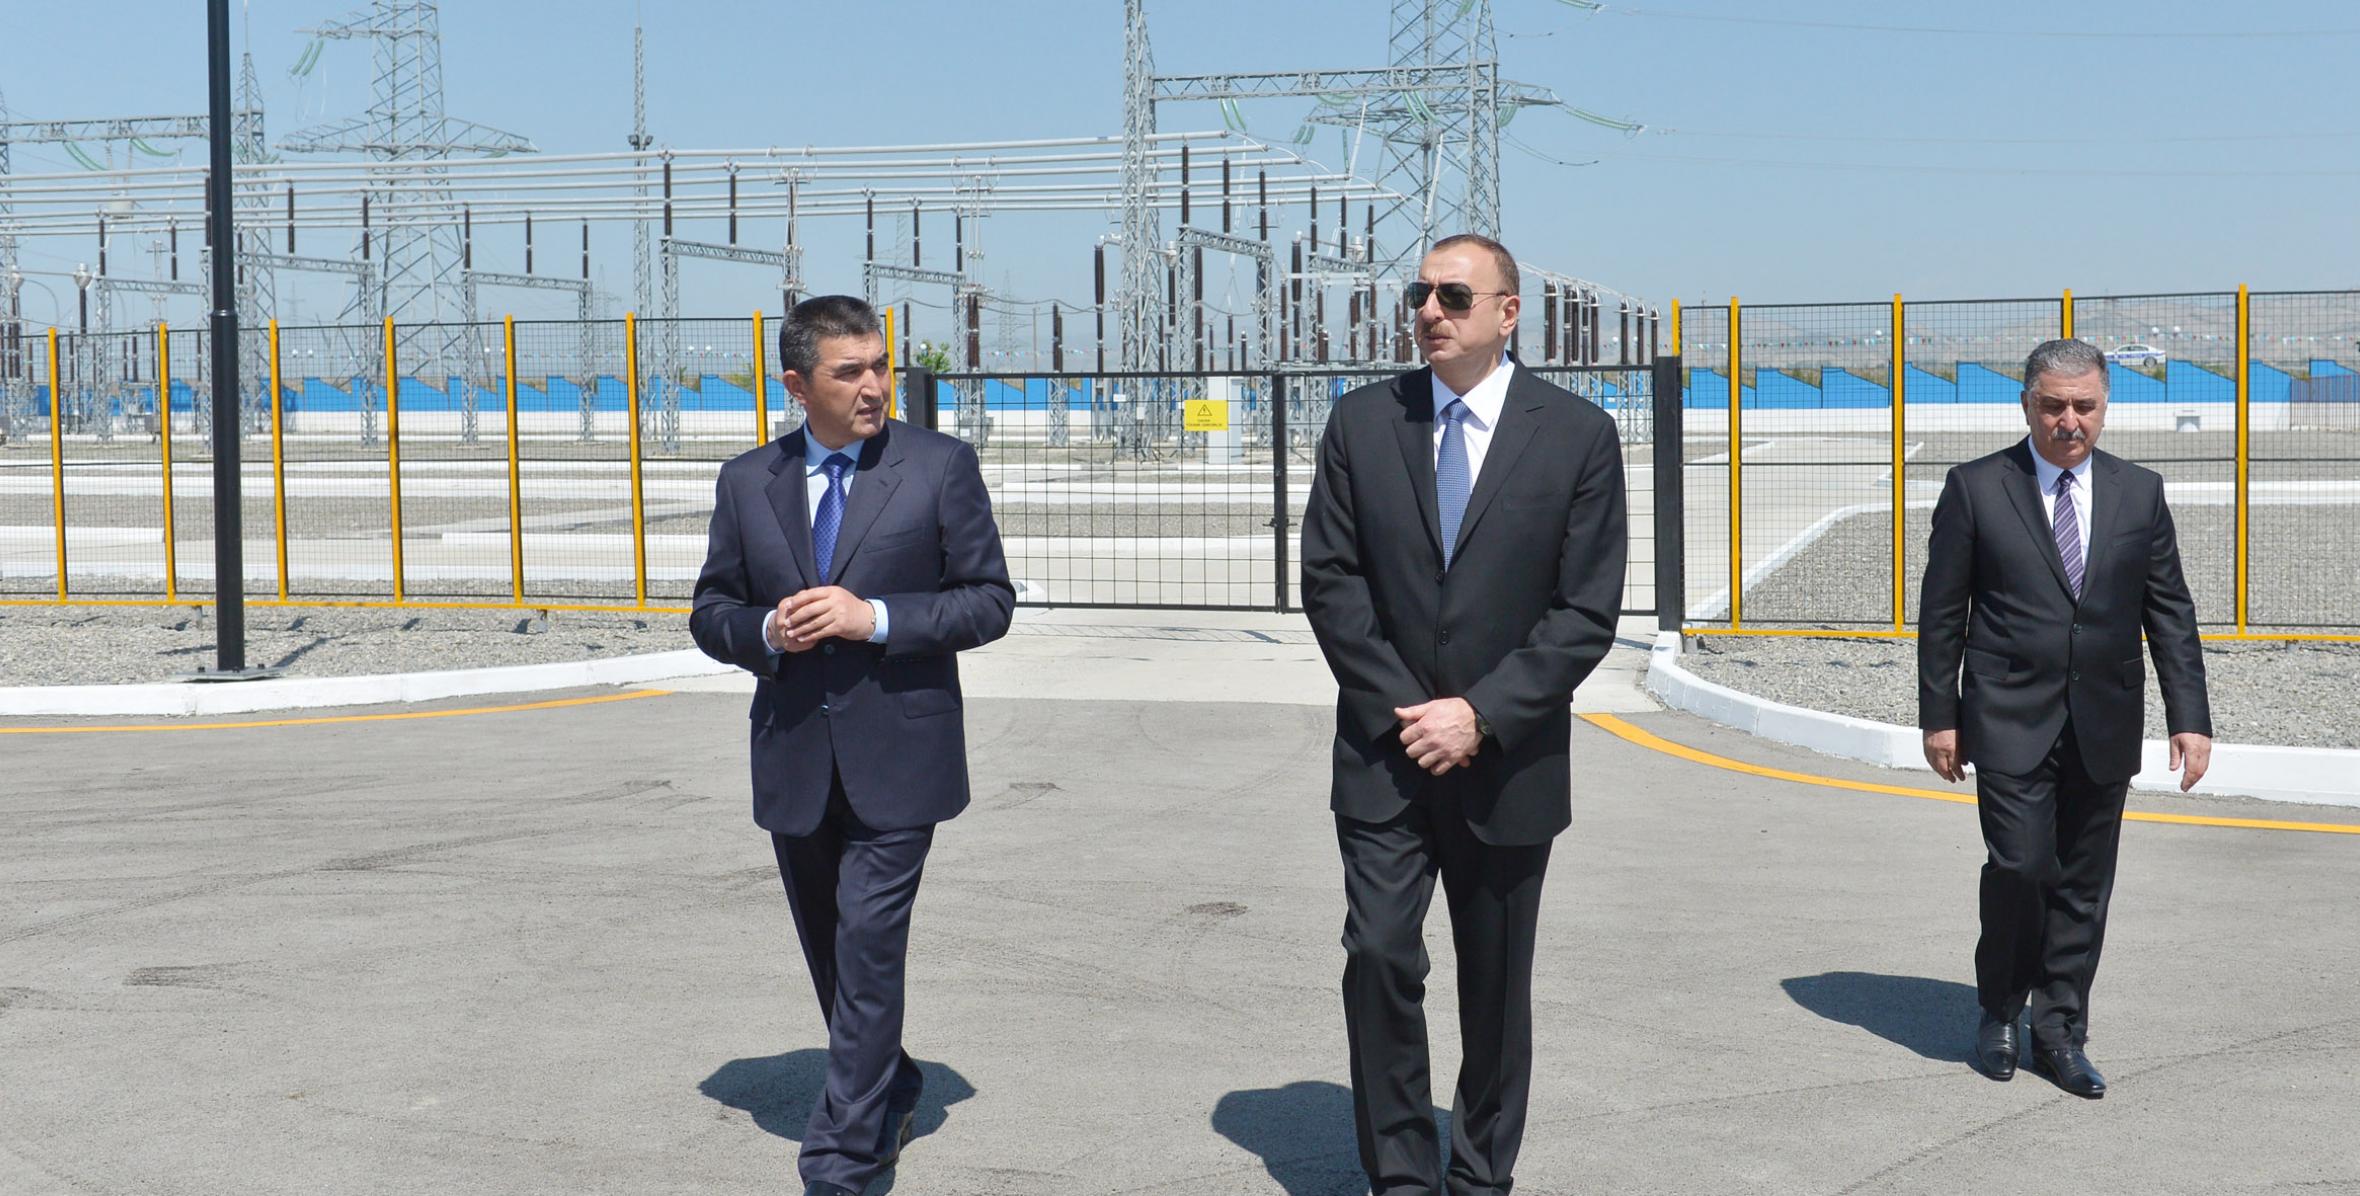 Ilham Aliyev attended the opening of 220-kilovolt electric substation “Agdash”